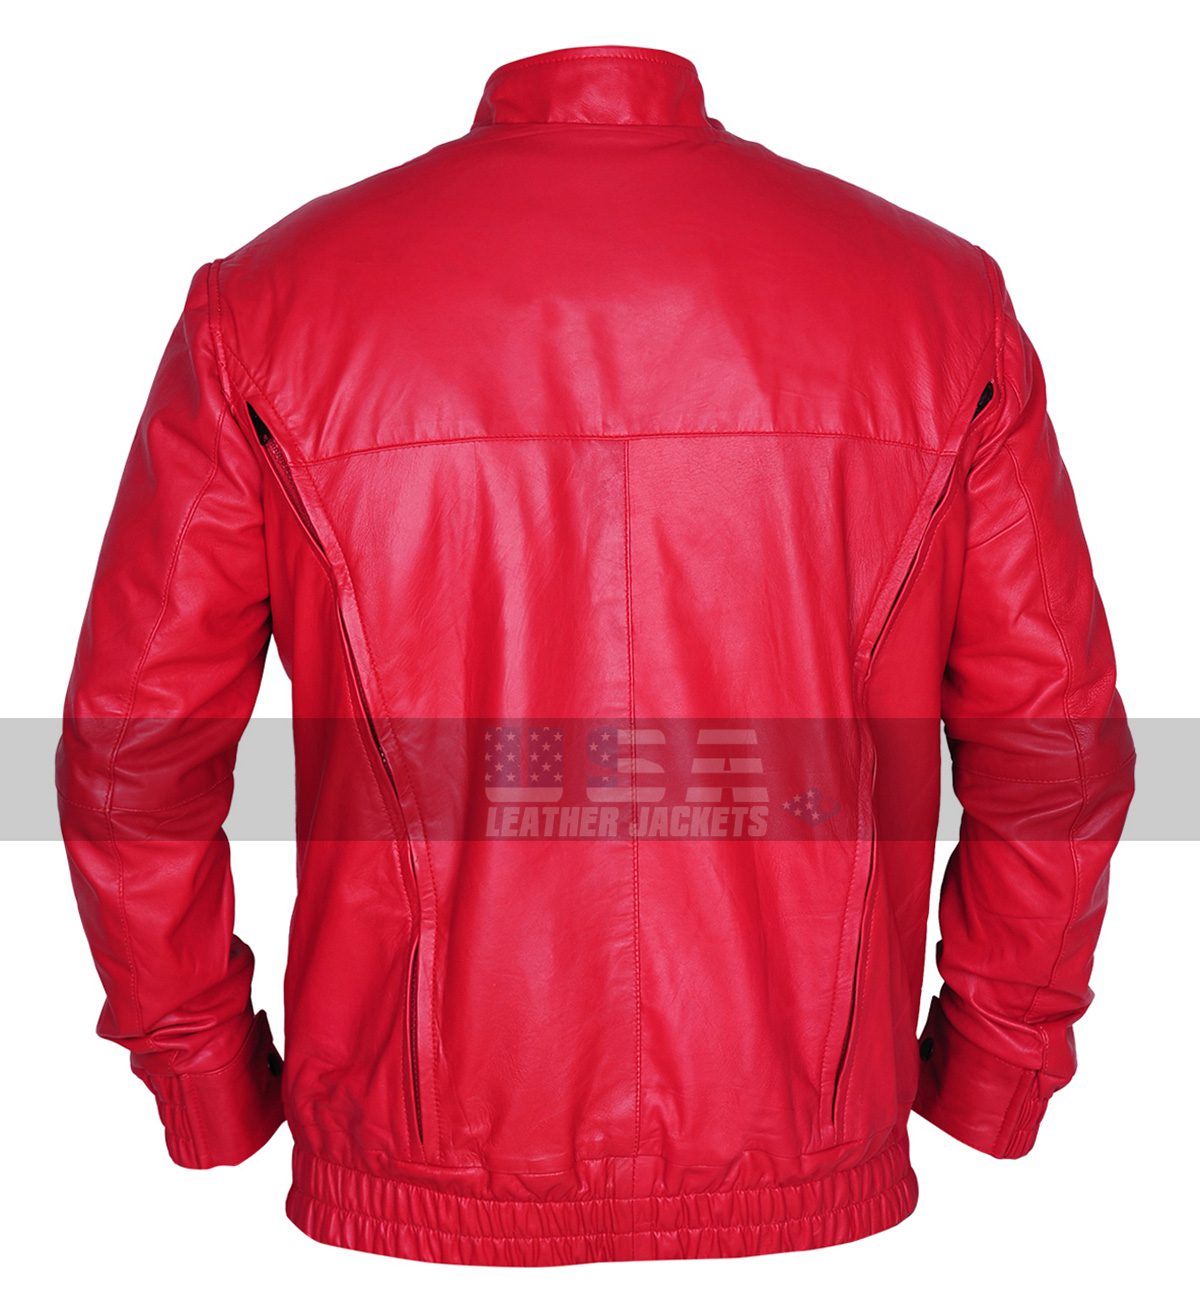 Ryan Gosling Place Beyond The Pines Motorcycle Leather Jacket